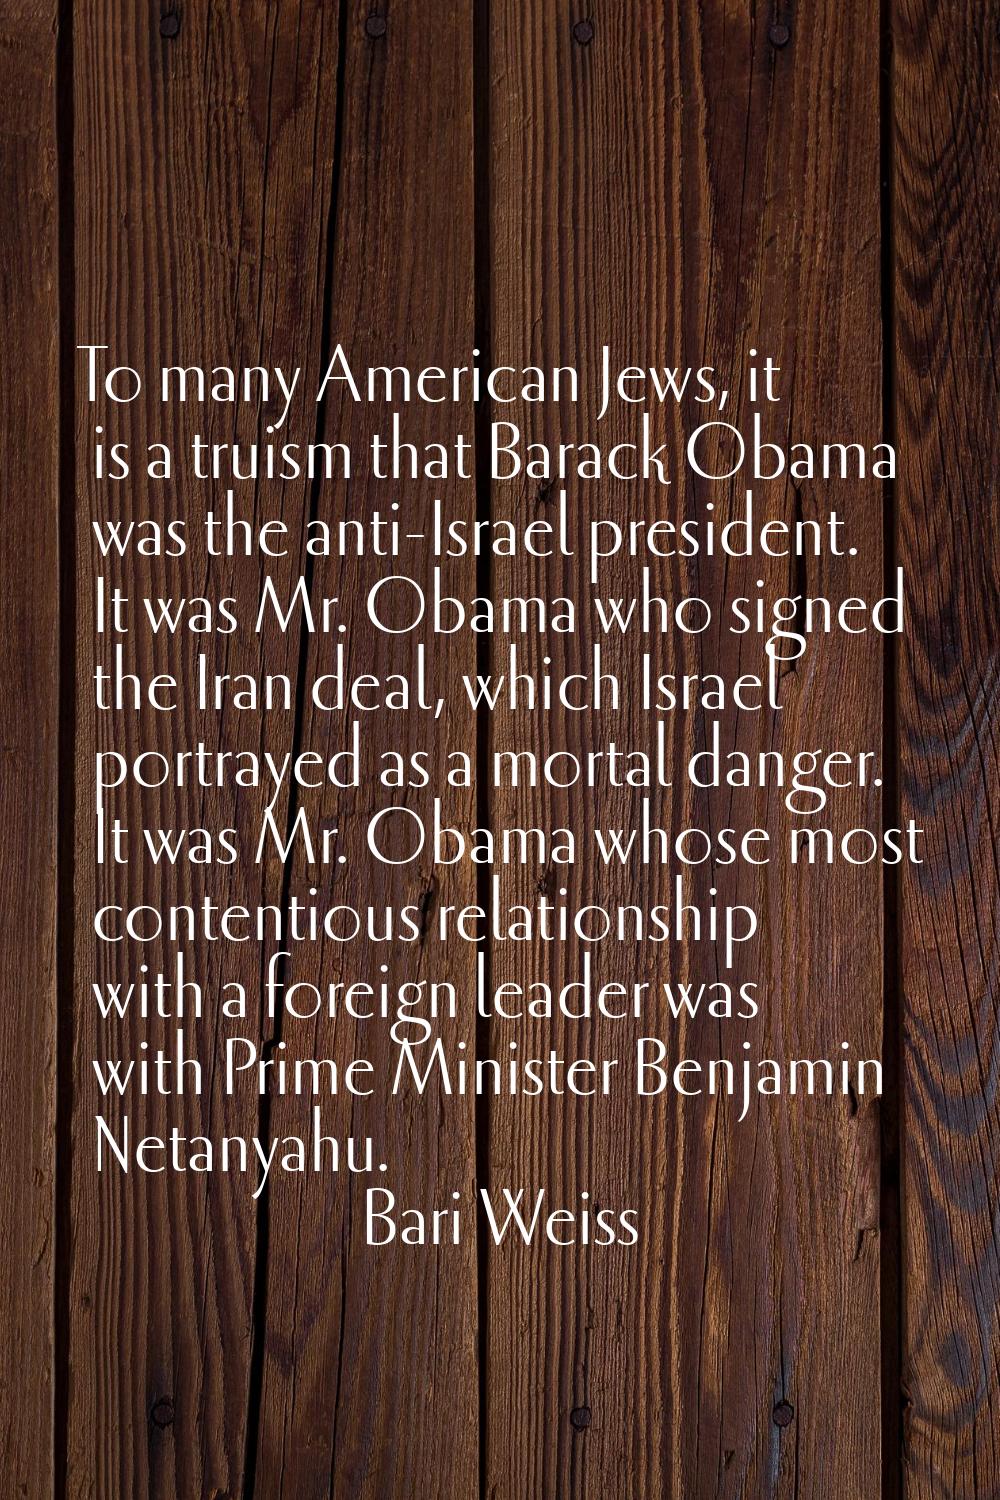 To many American Jews, it is a truism that Barack Obama was the anti-Israel president. It was Mr. O